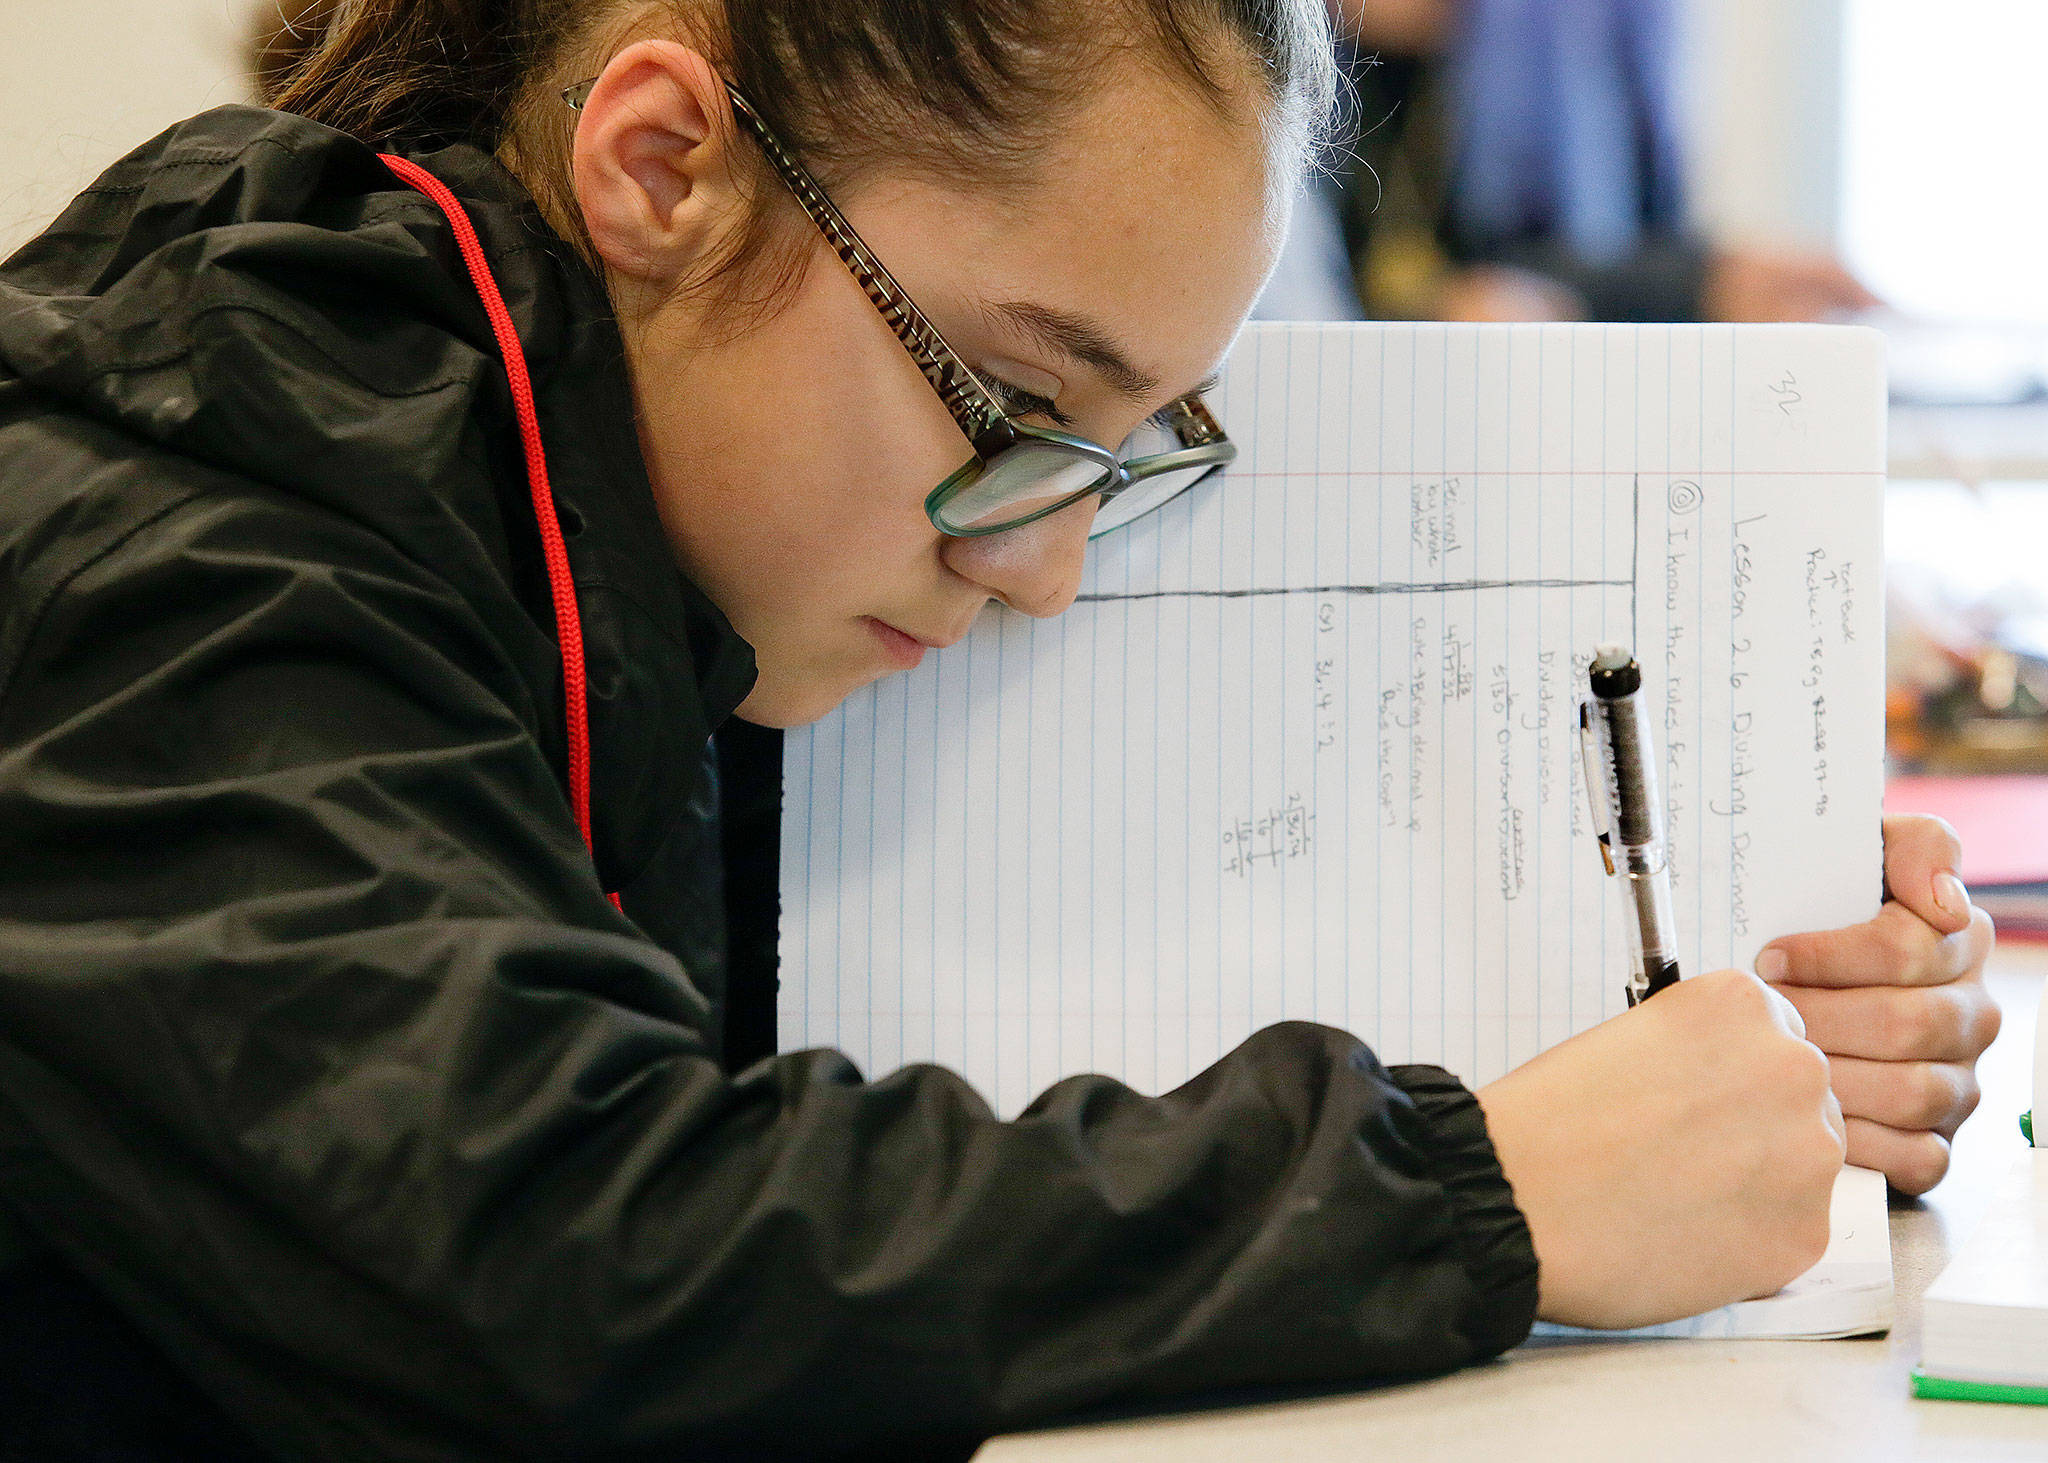 Brooklyn Flores works on homework at the Learning Labs at Olympic View Middle School, a free after-school program for sixth-graders to get an academic boost. Volunteer tutors range from high school students to retirees. (Andy Bronson / The Herald)